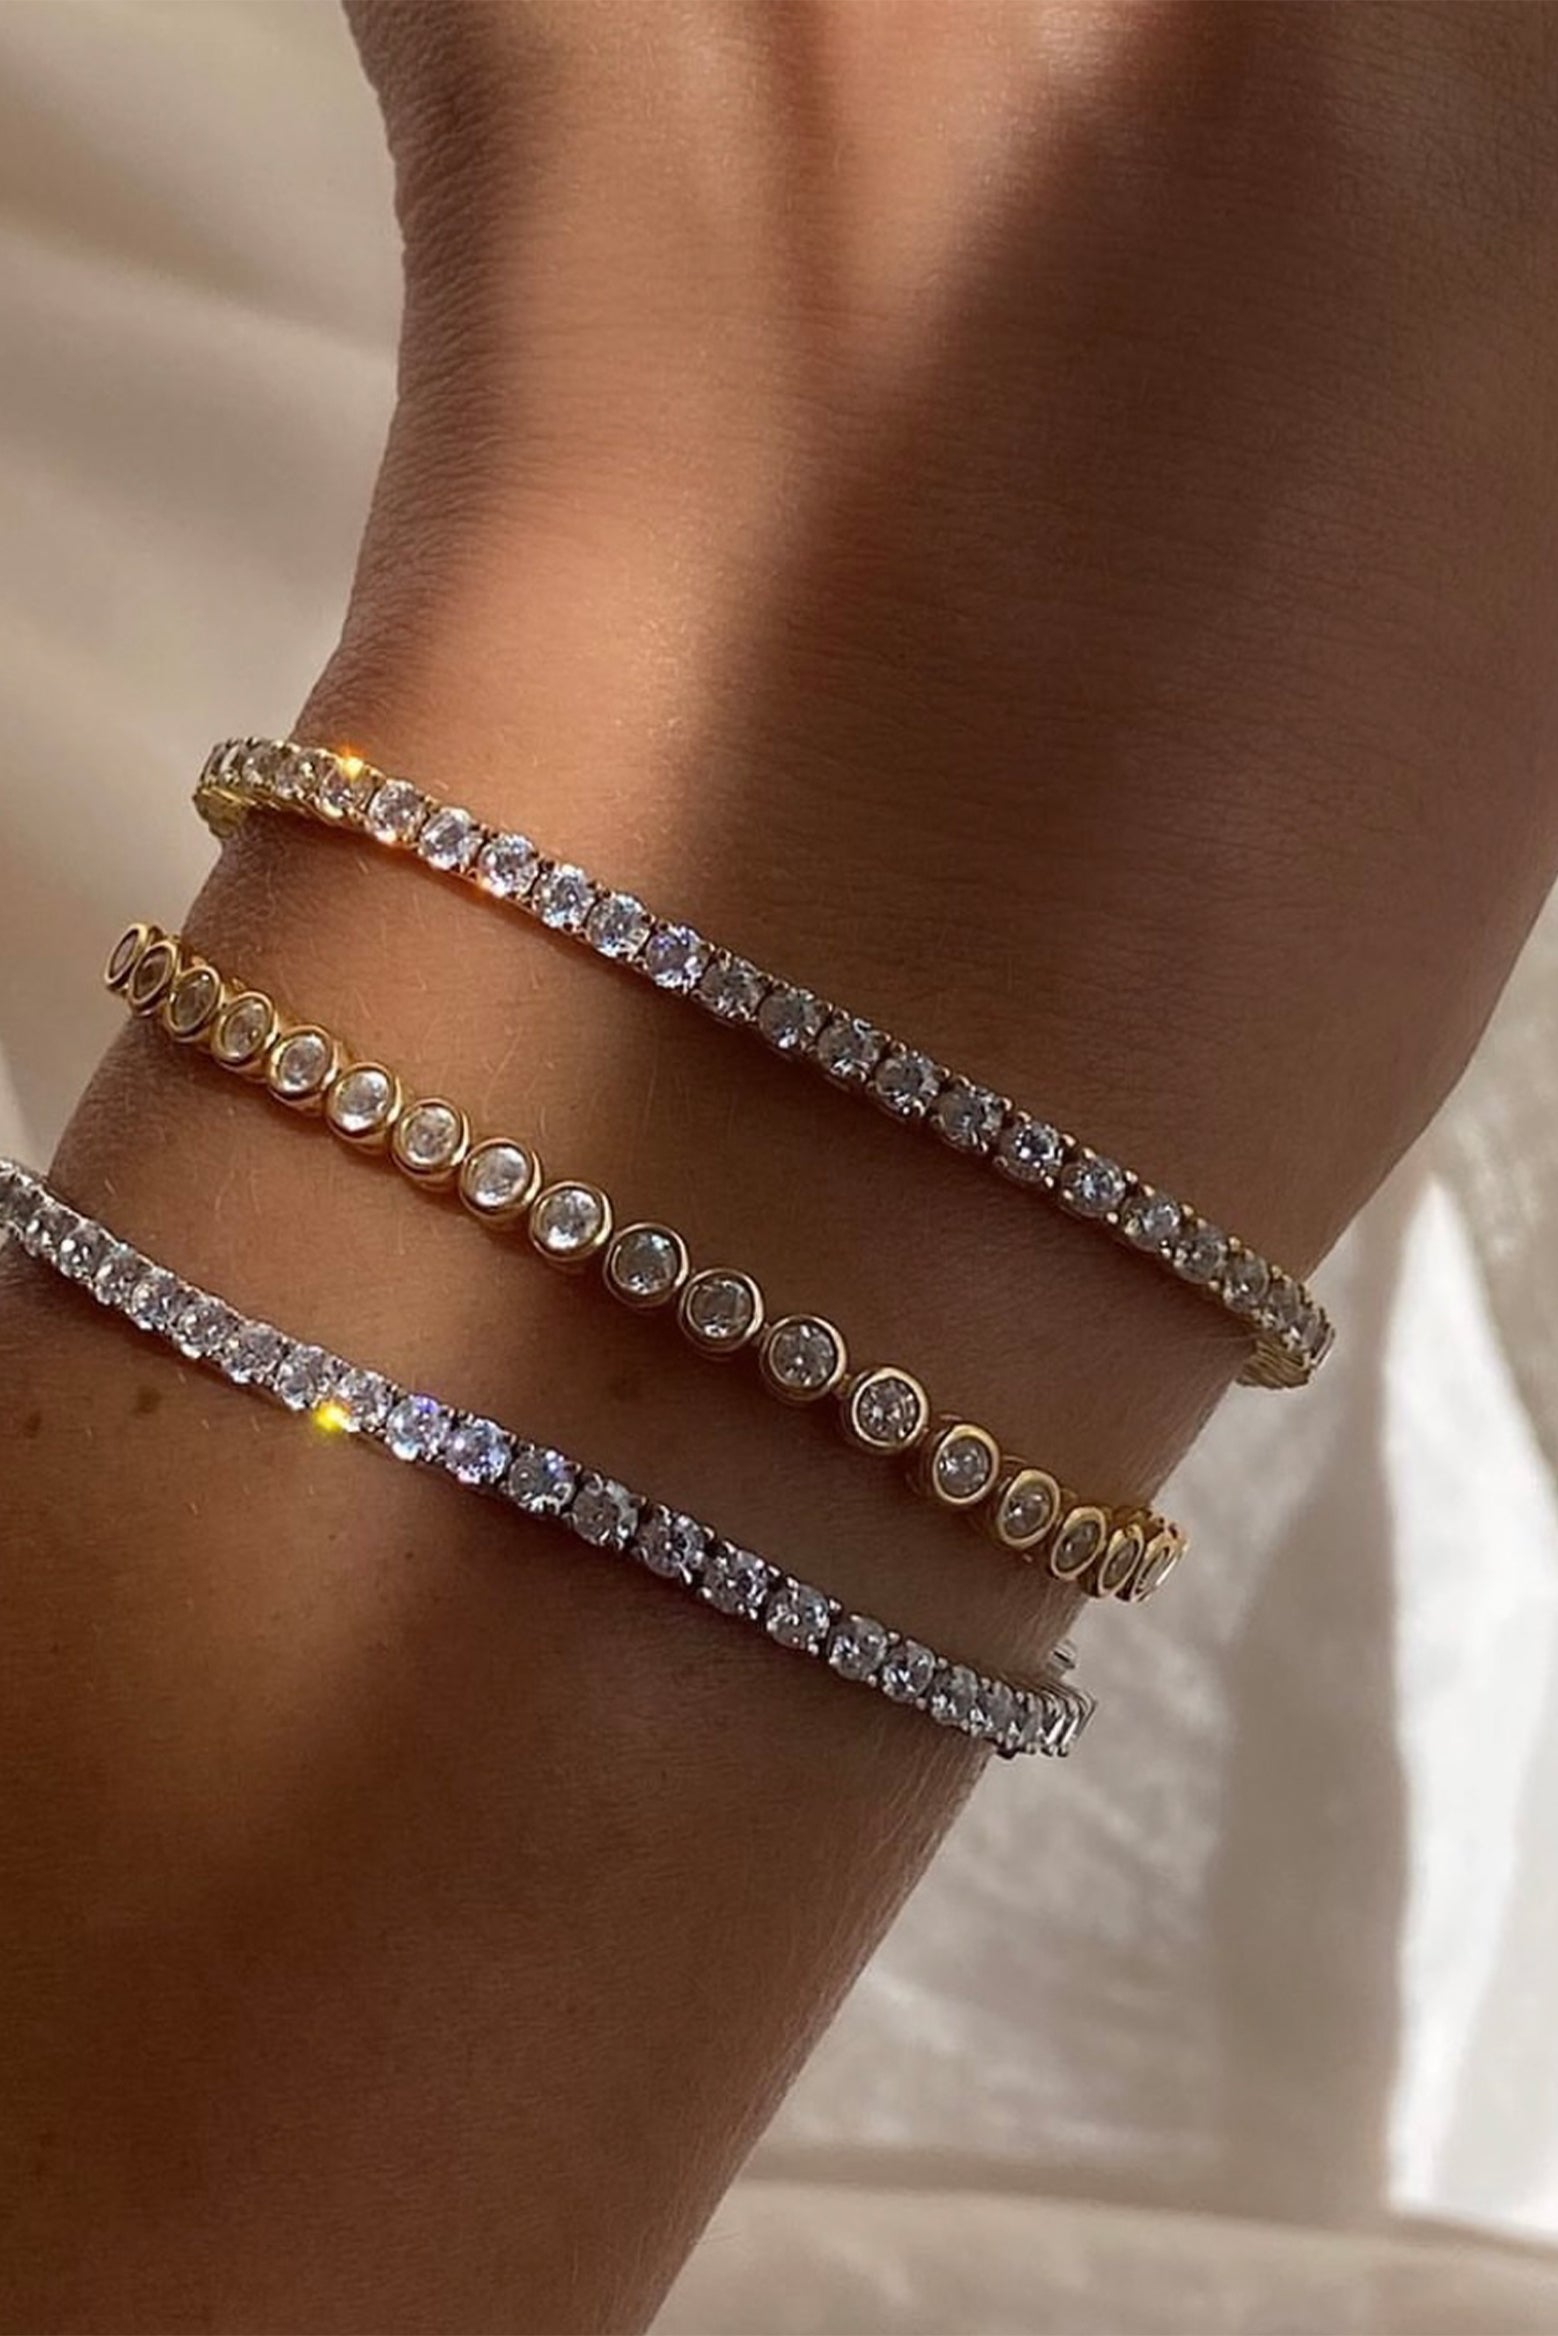 New 2023 Designer T Smiley Dainty Bracelets For Women Silver Luxury Trend  Fashion Jewelry Gift I825 From U6869, $17.86 | DHgate.Com